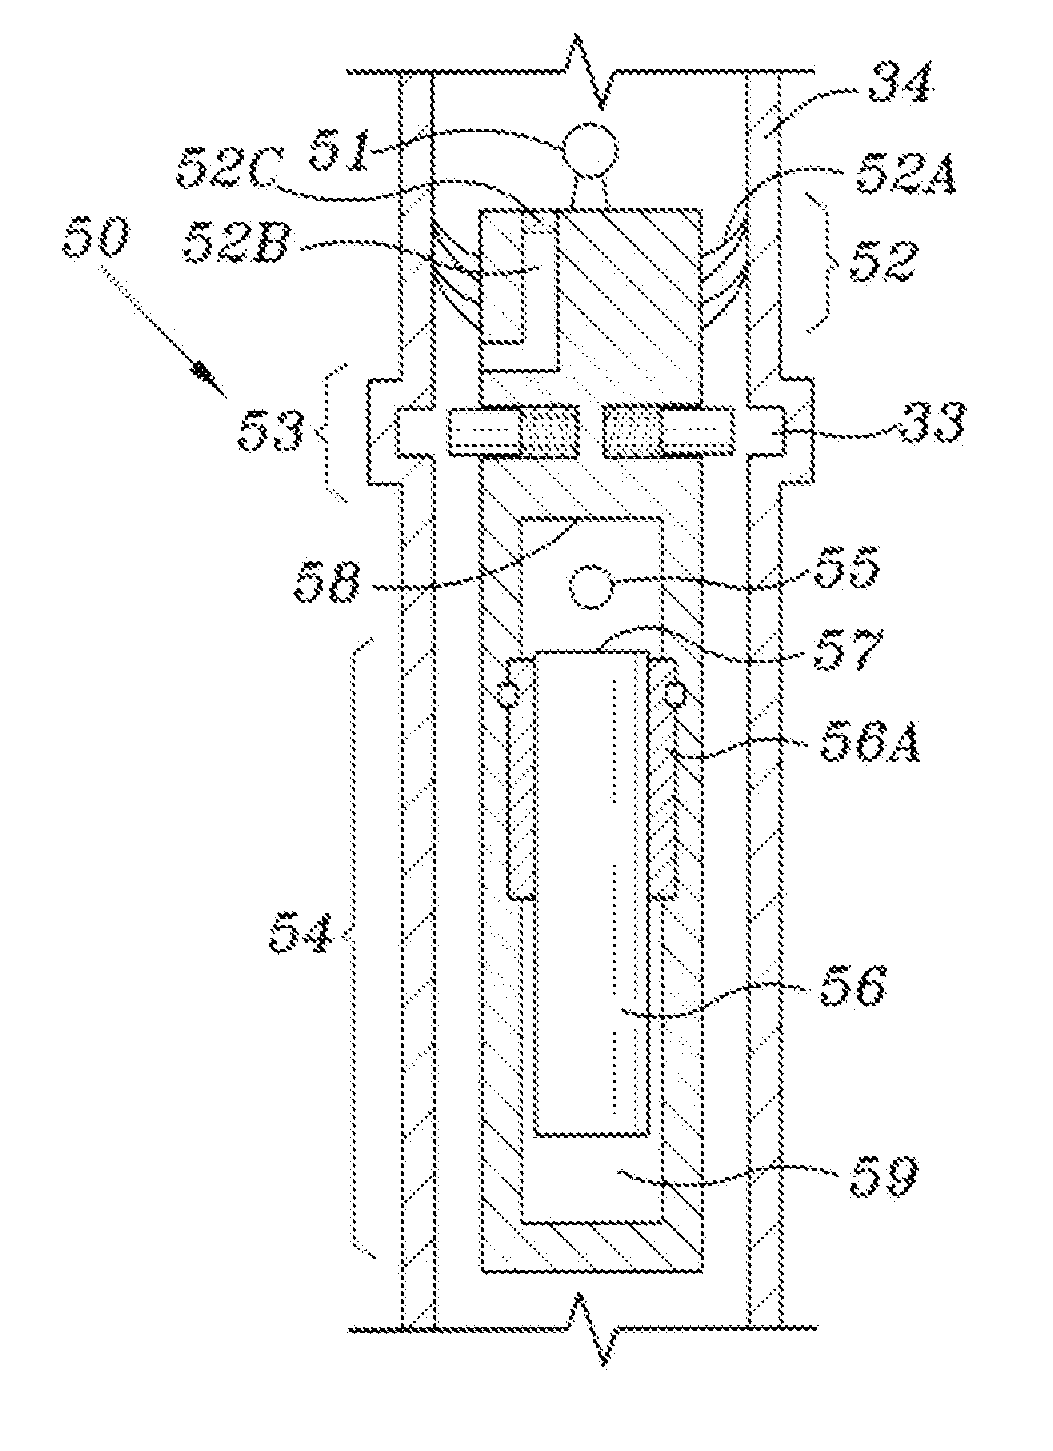 Method and Apparatus for Maintaining Pressure In Well Cementing During Curing